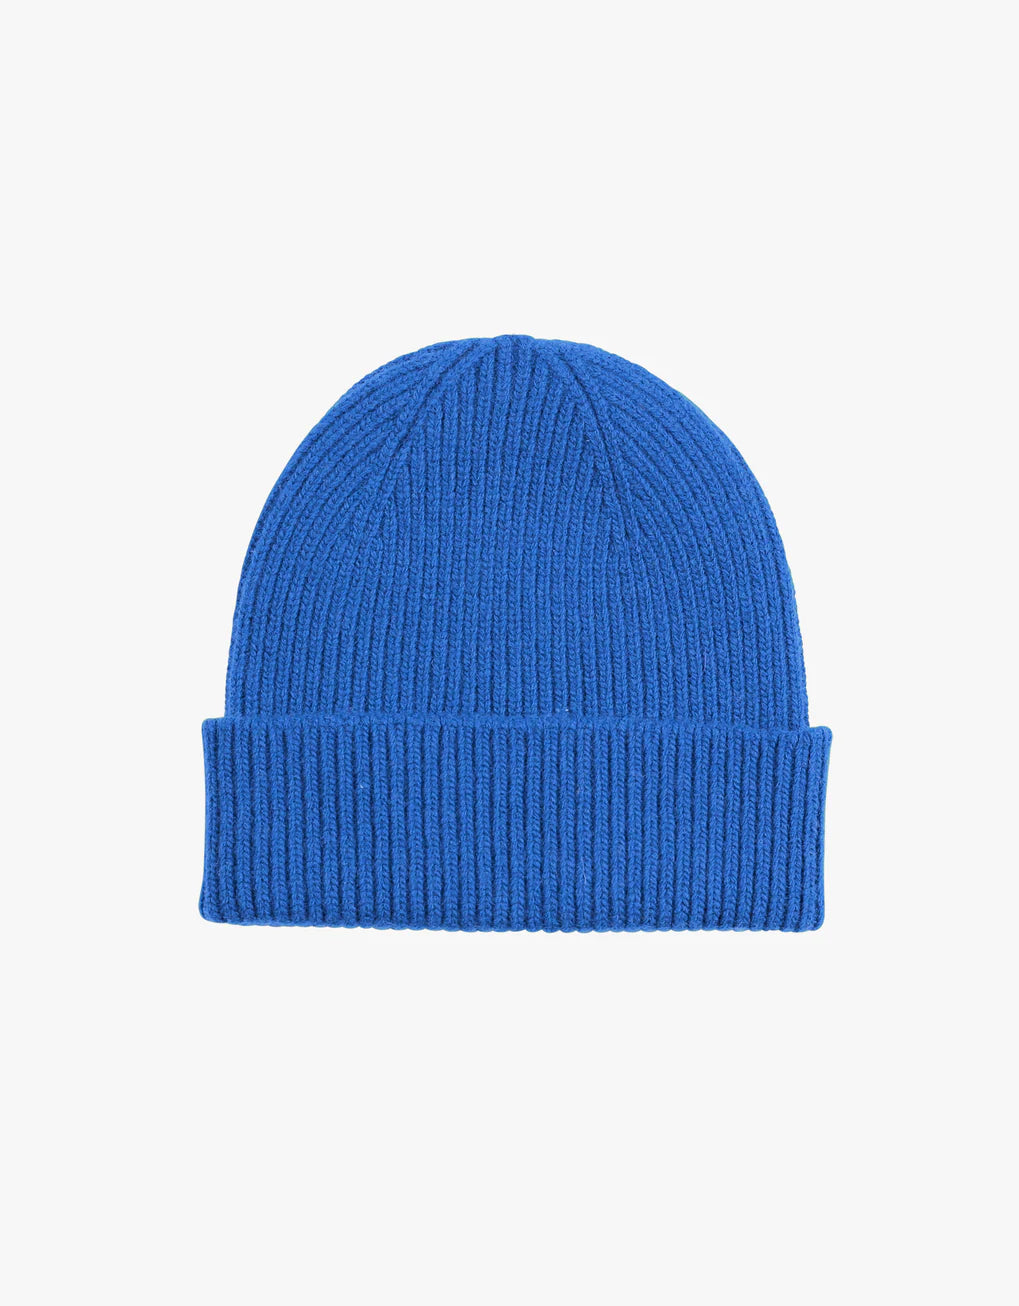 A Colorful Standard Merino Wool Beanie - perfect for the winter season - on a white background.